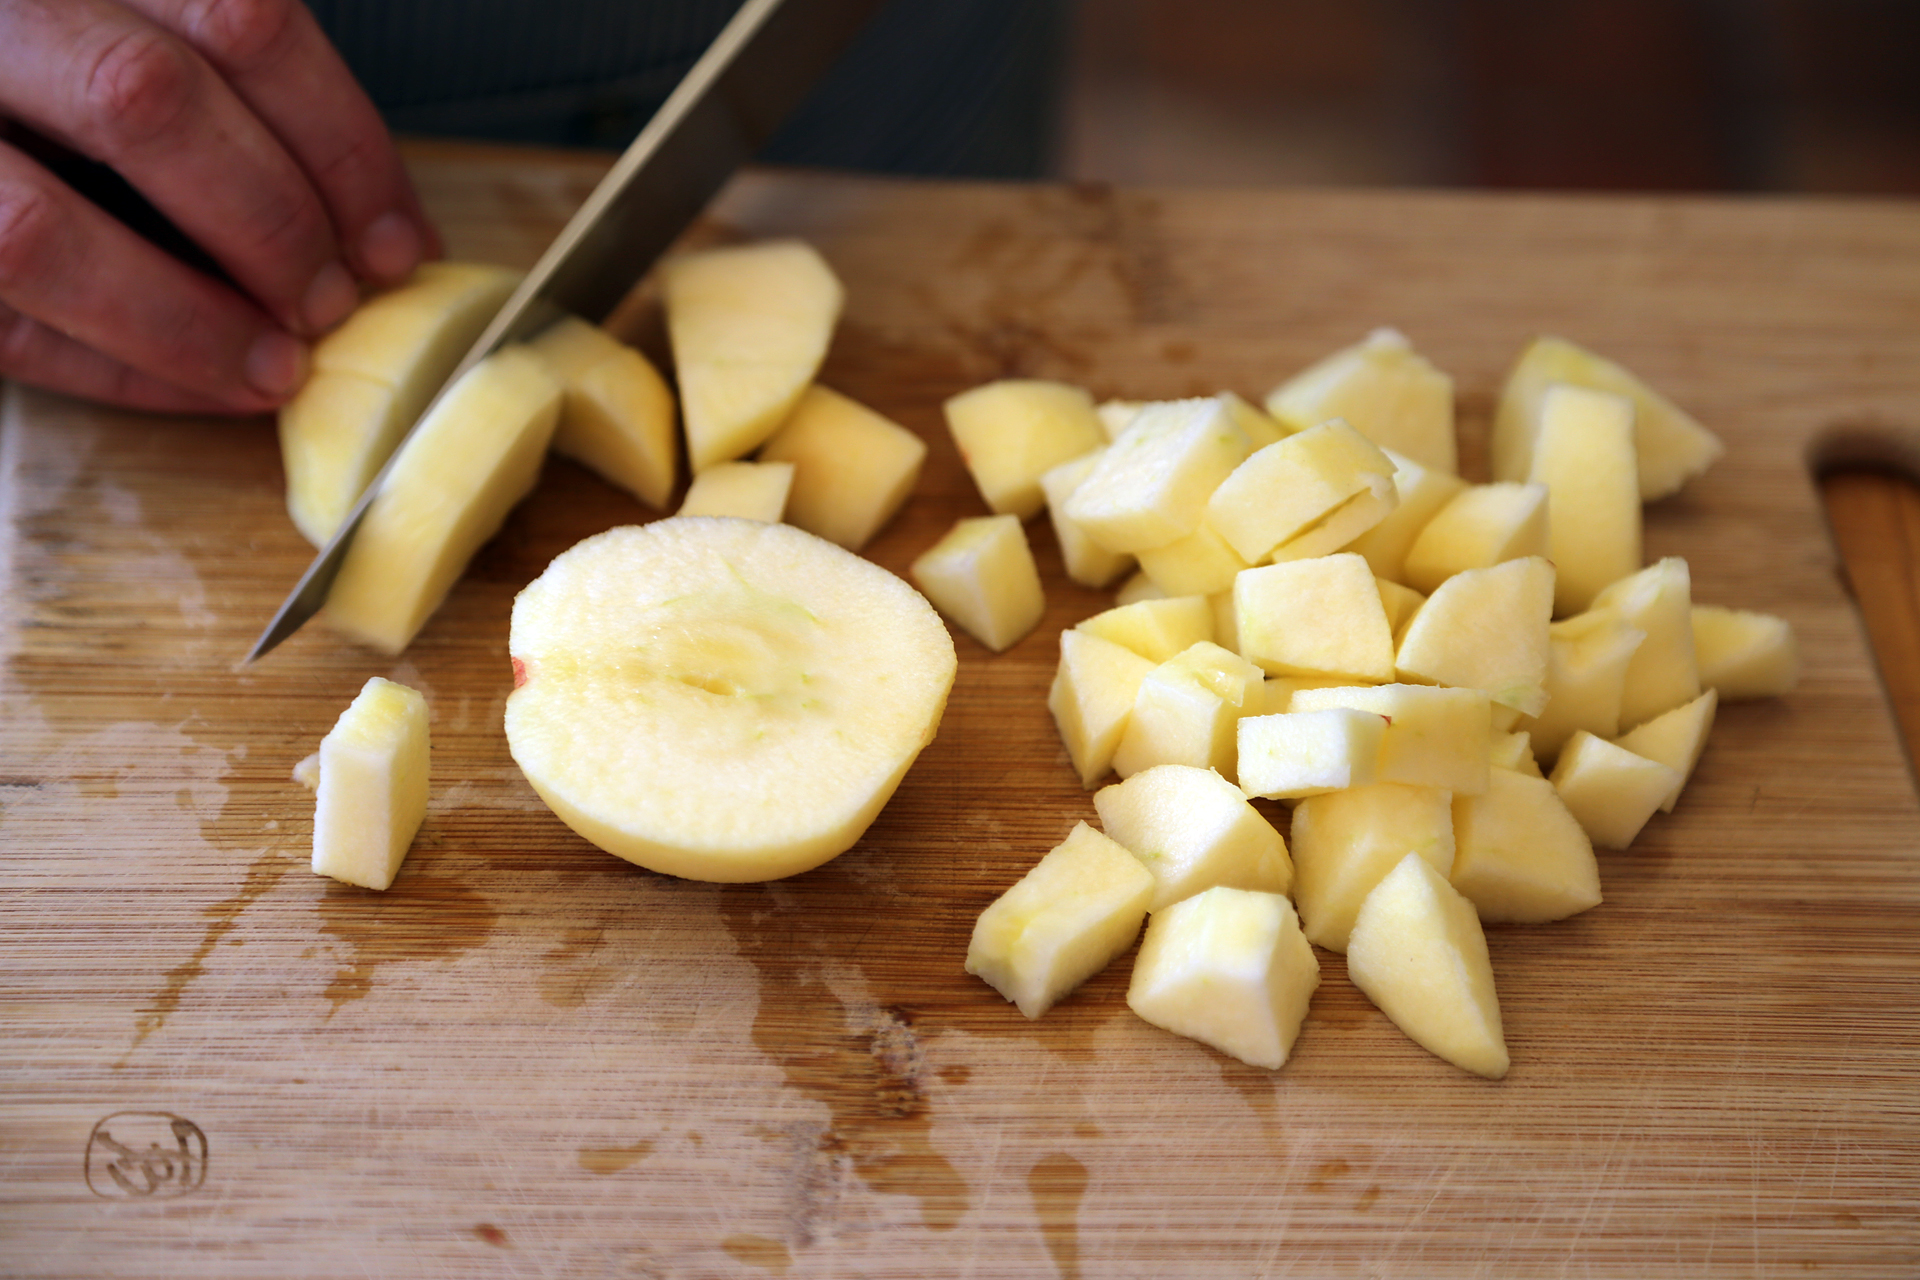 Peel, core and chop apples.